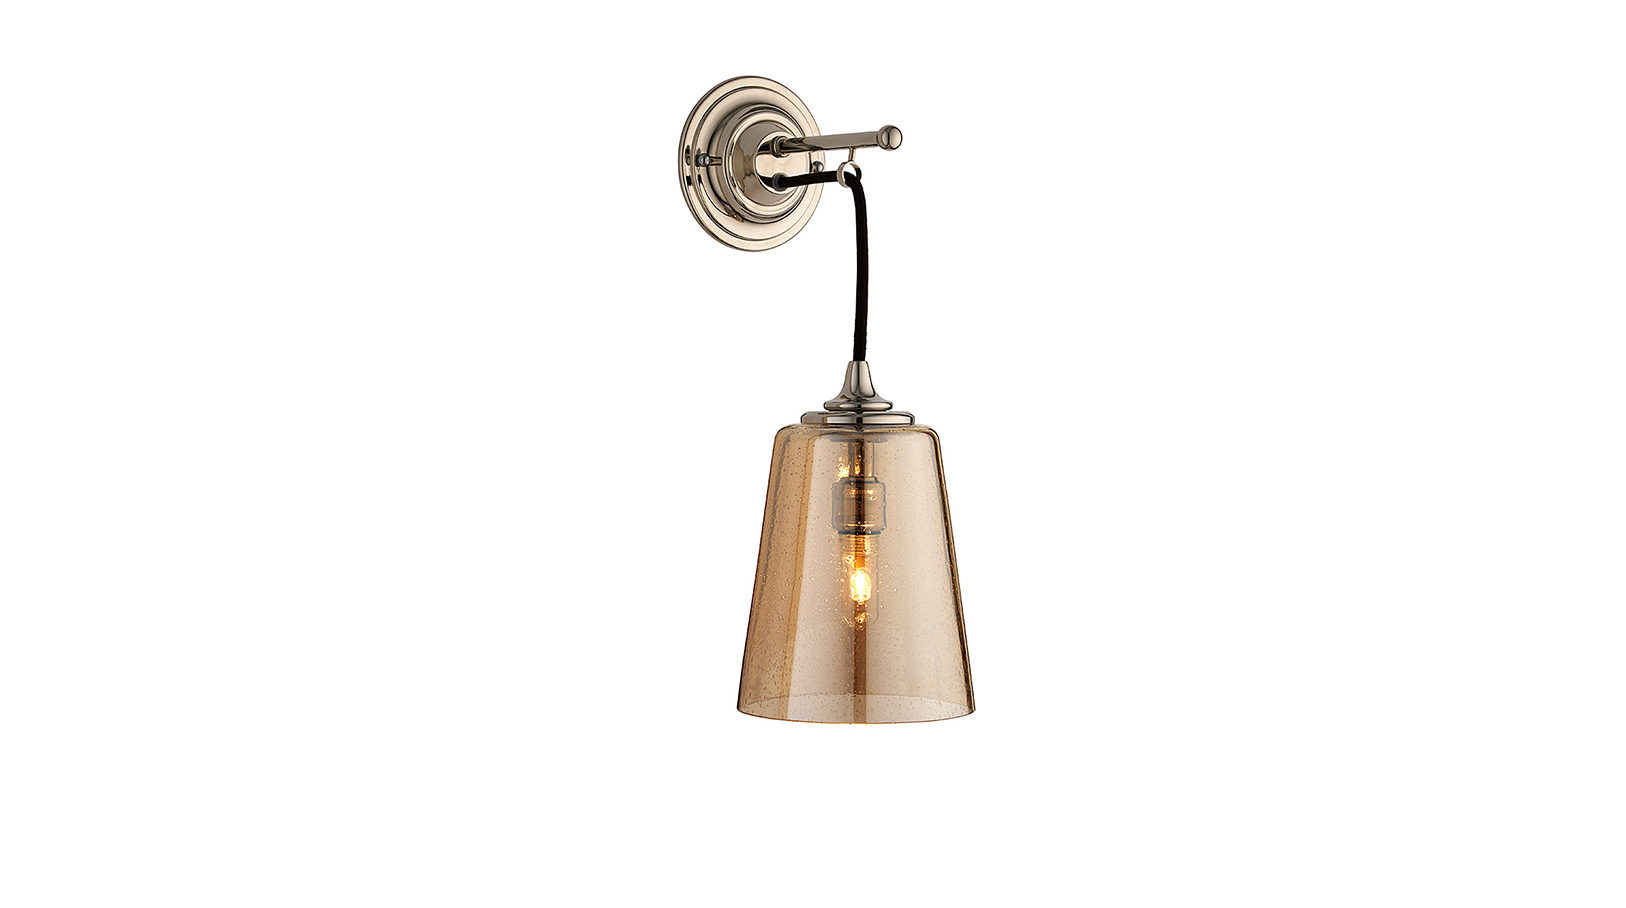 The Single Dalby Light, Antique Conical Shade